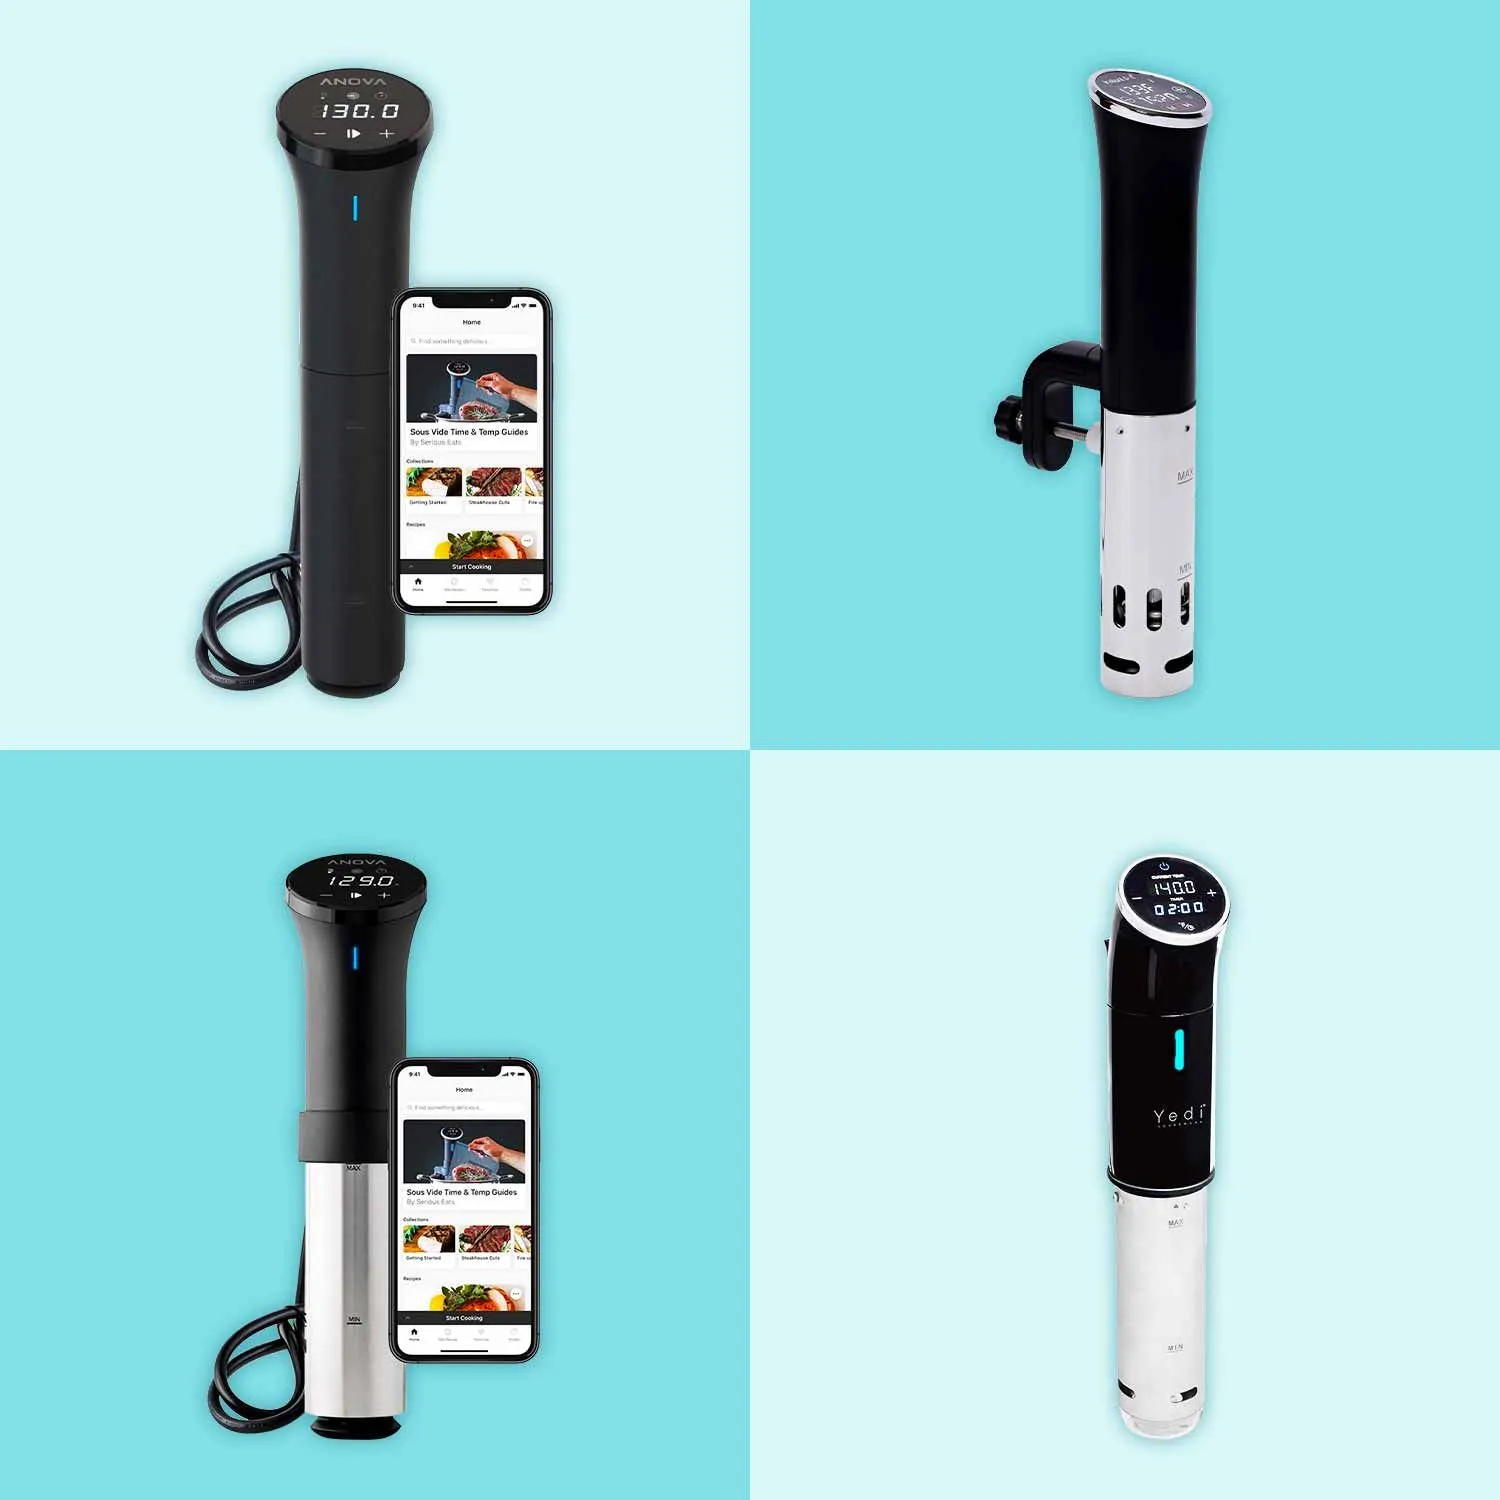 7 Best Sous Vide Machine in 2021 - Buying Guide & Product